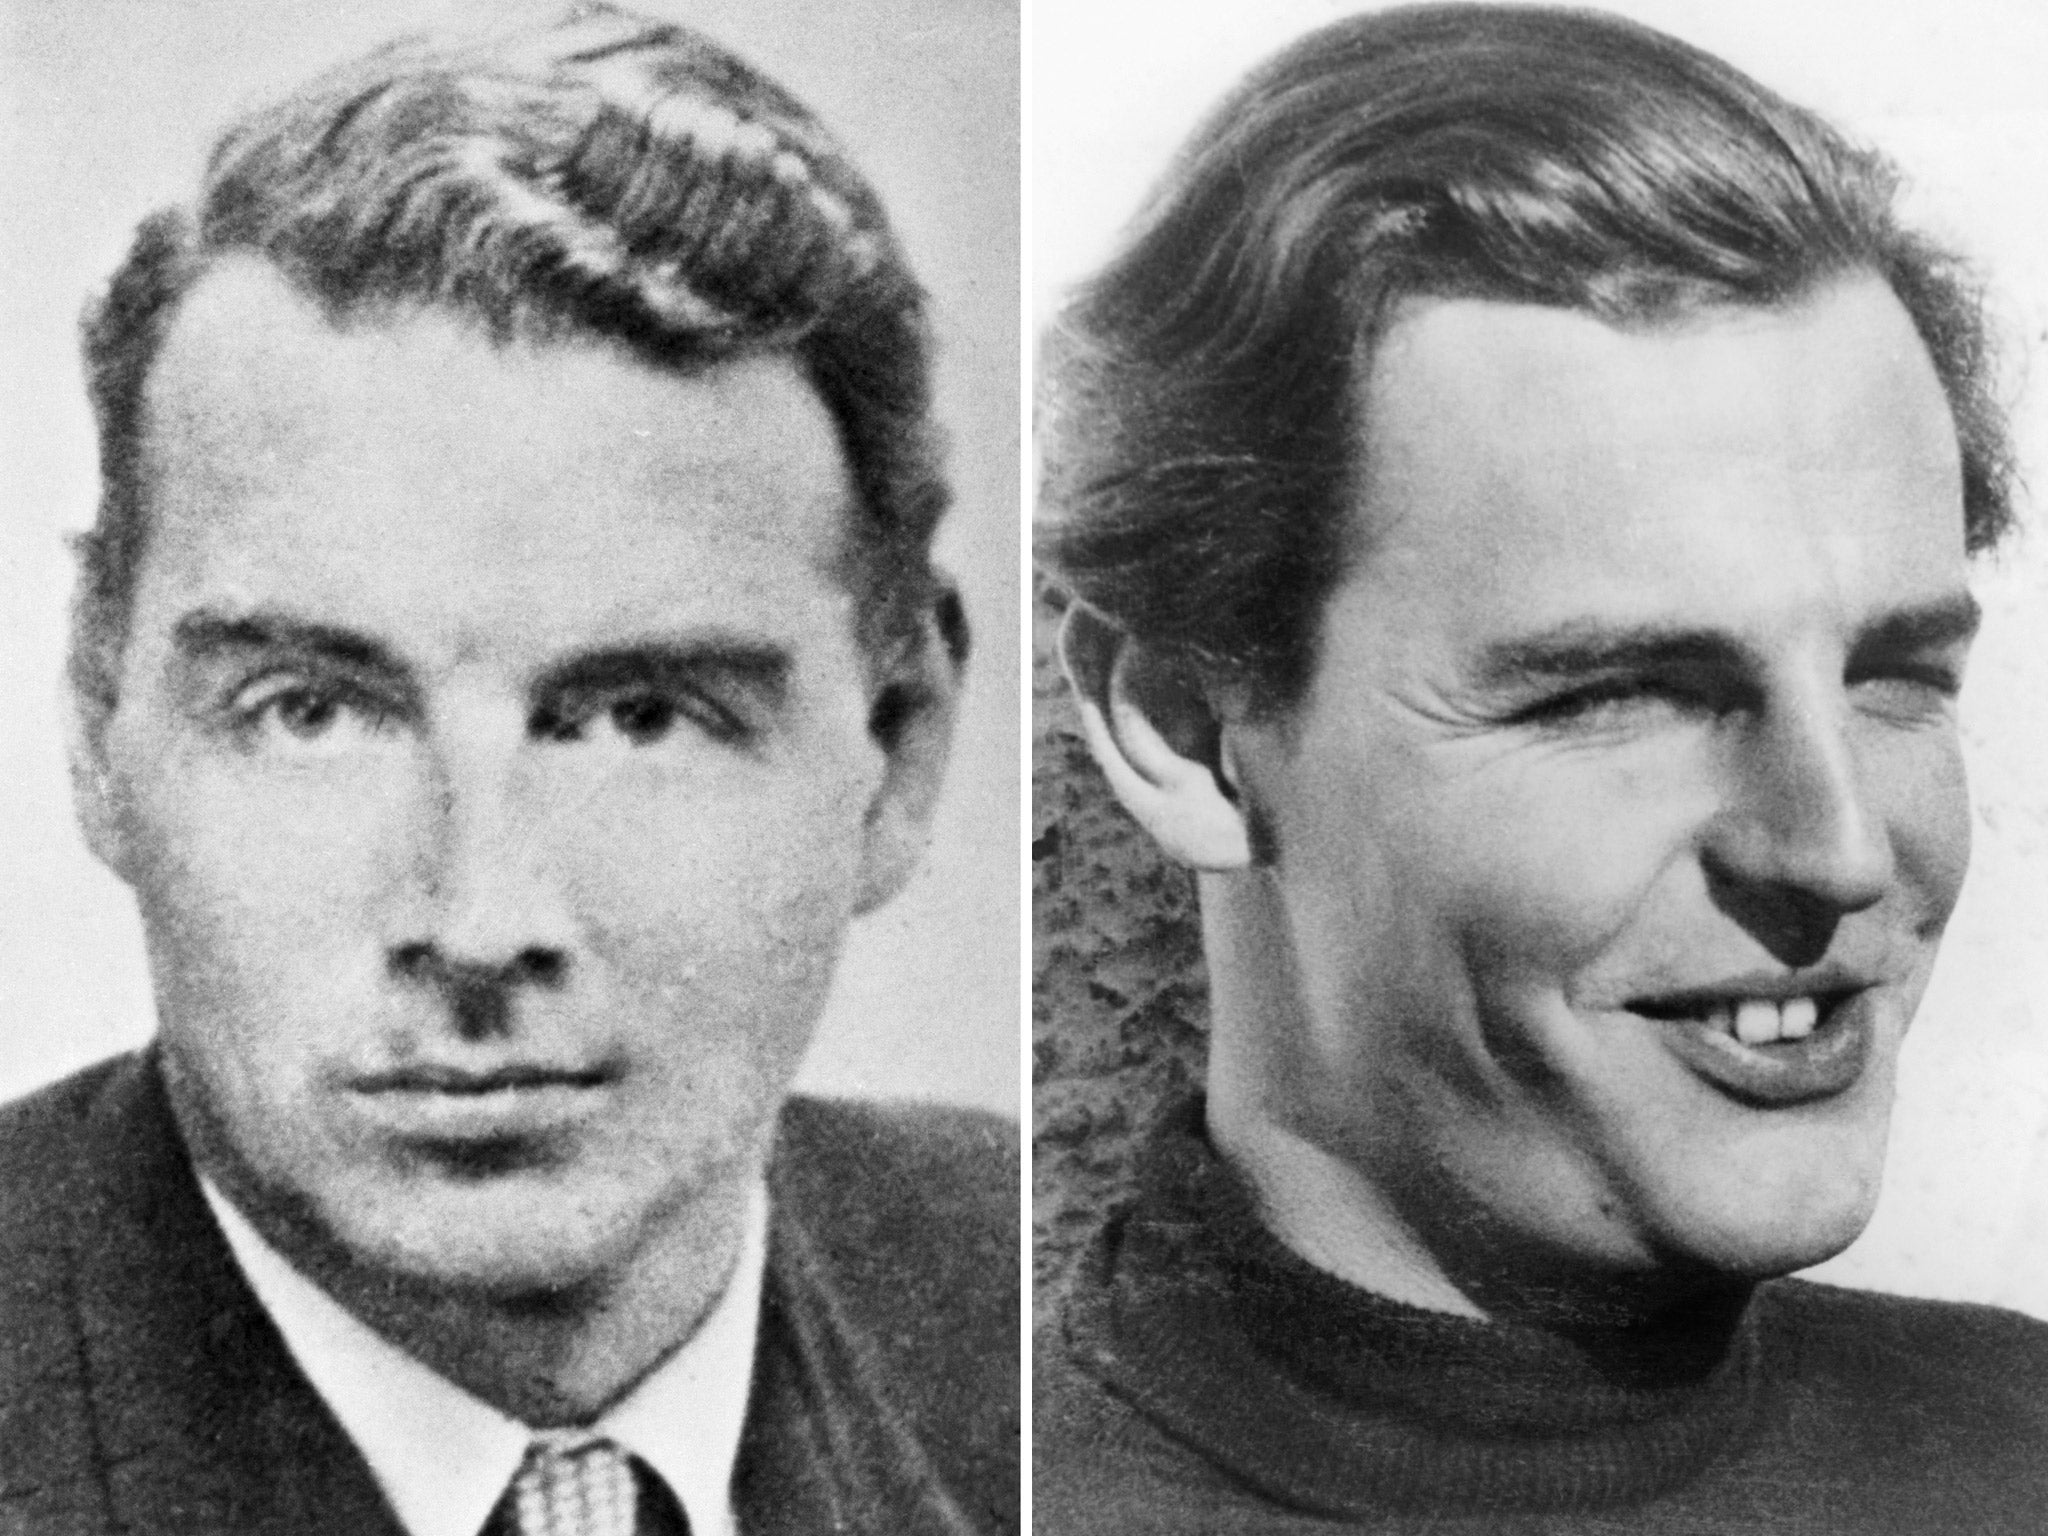 British double agents Guy Burgess and Donald Maclean